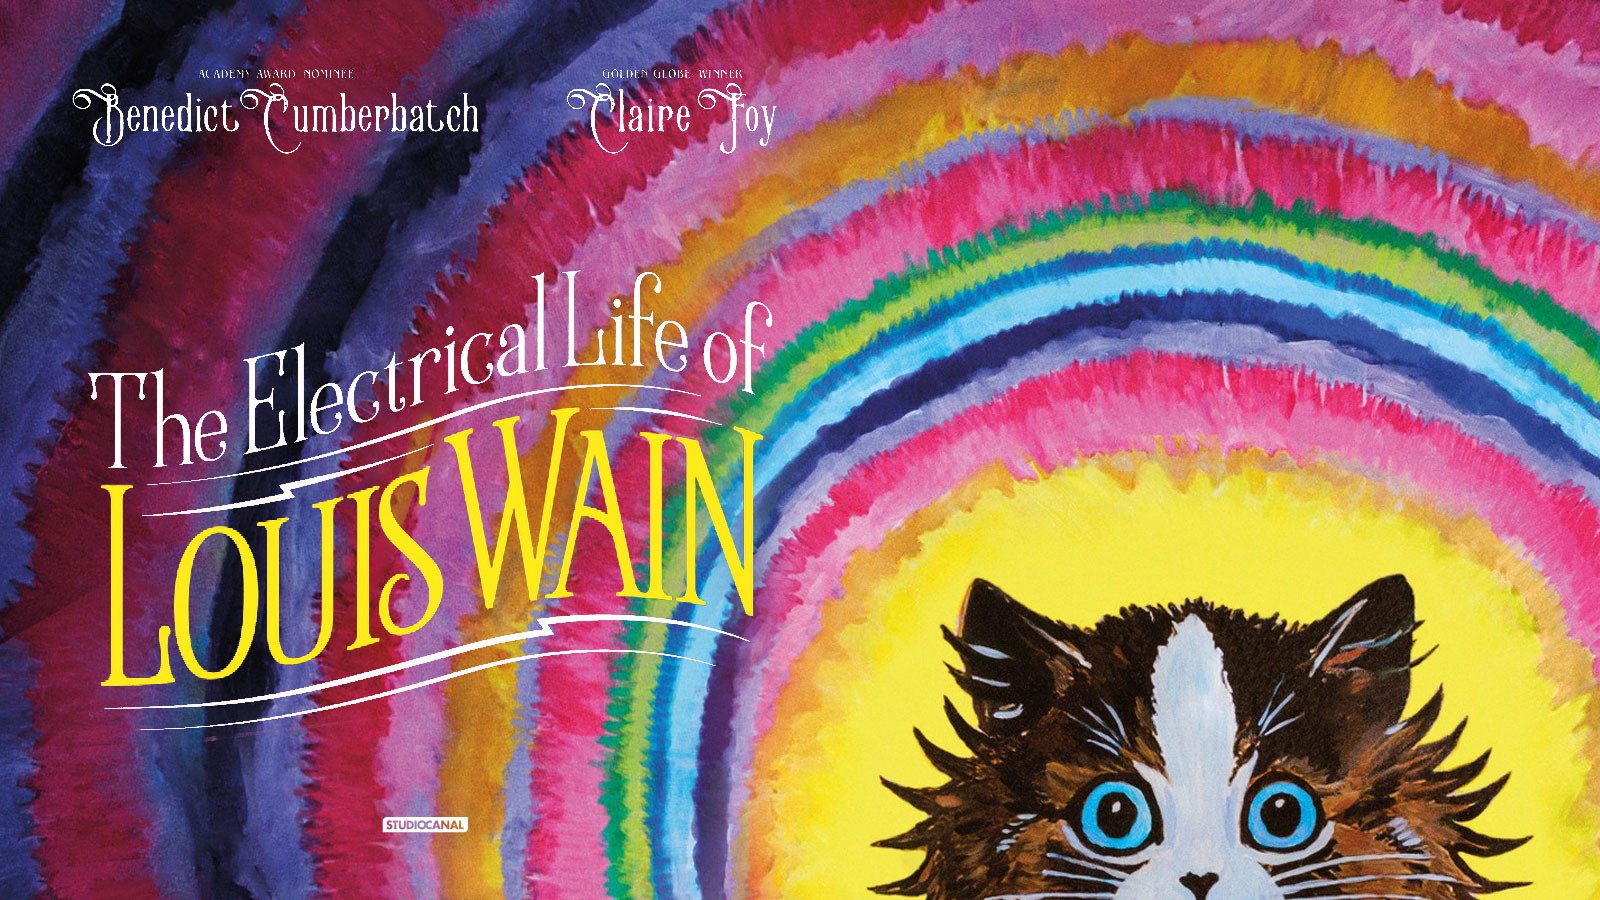 ELECTRICAL LIFE OF LOUIS WAIN